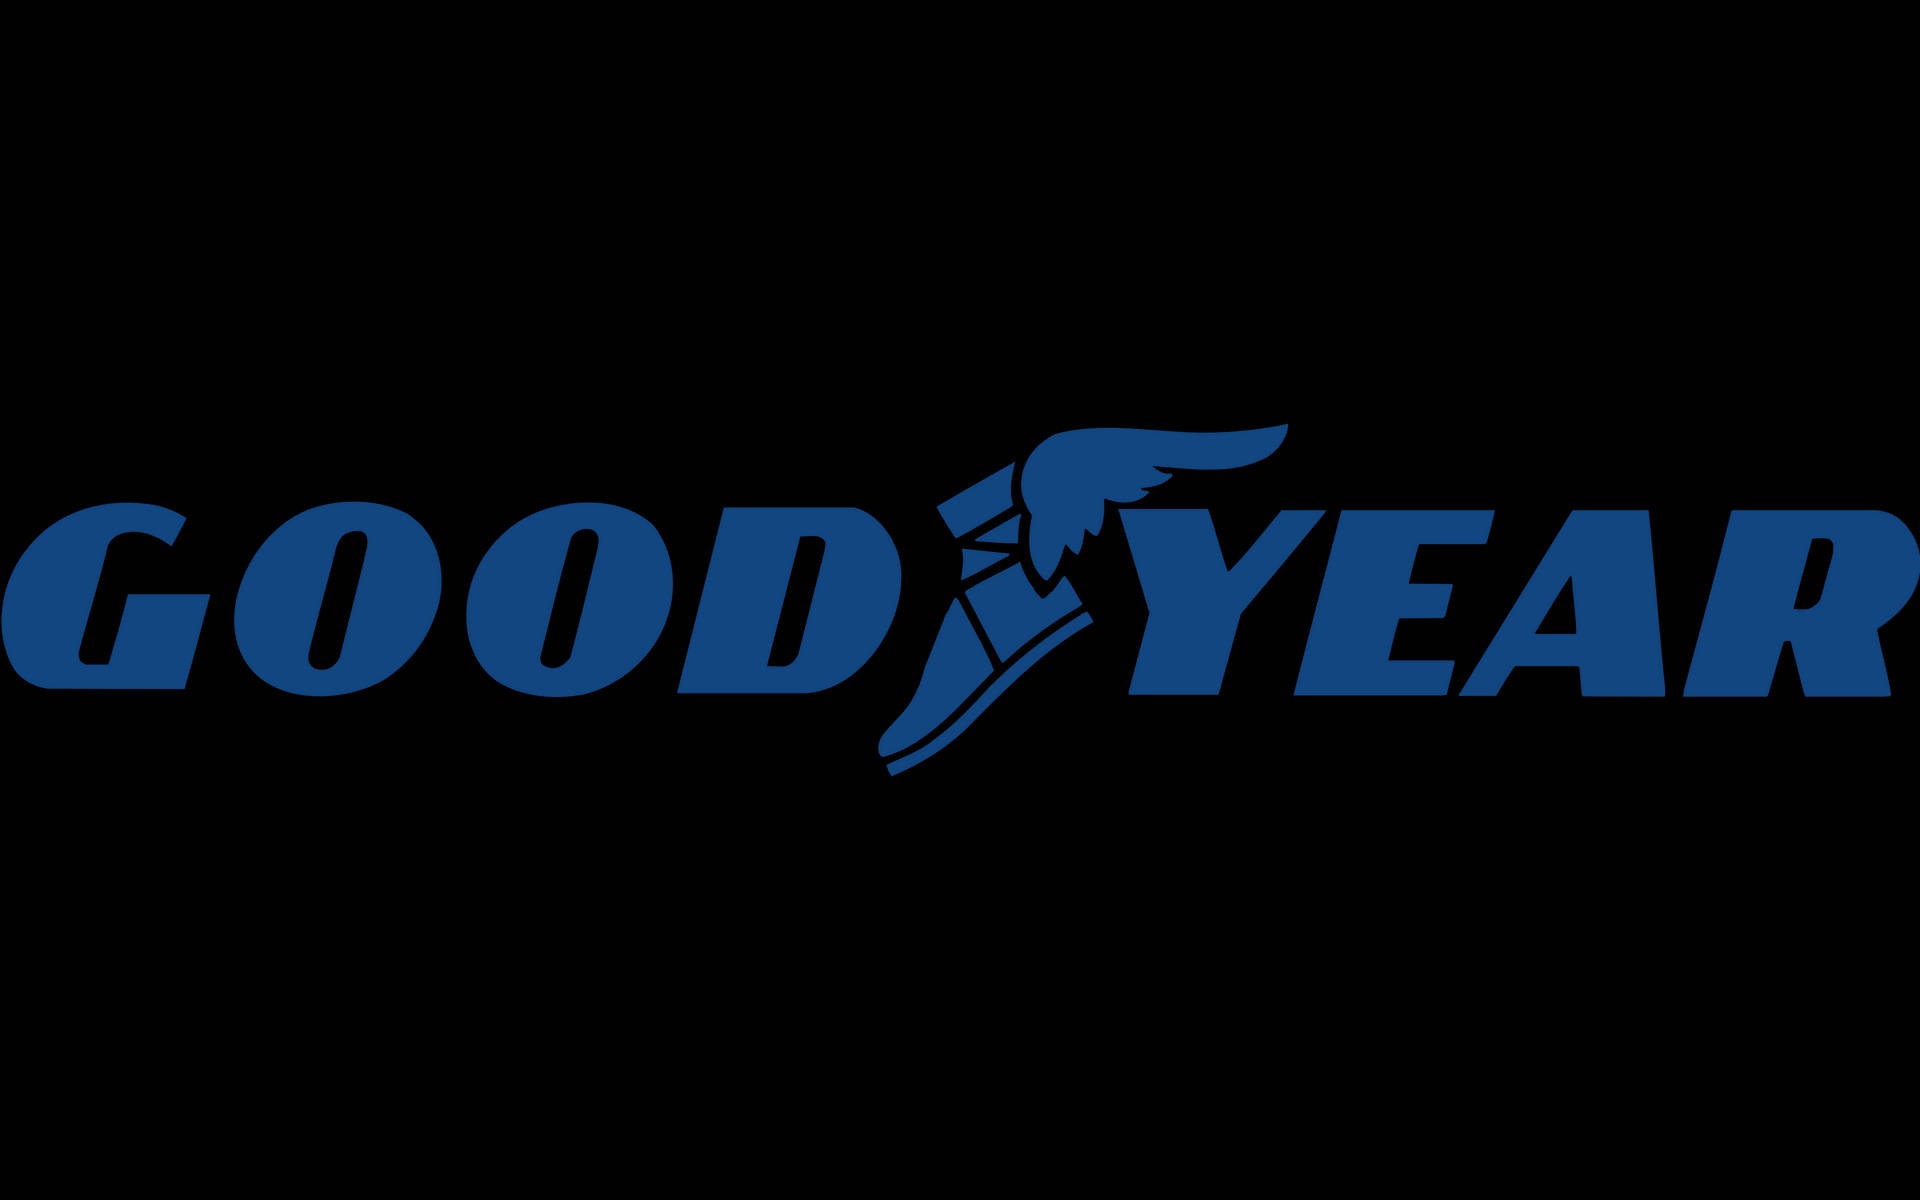 Goodyear Tire and Rubber Company Logo Wallpaper